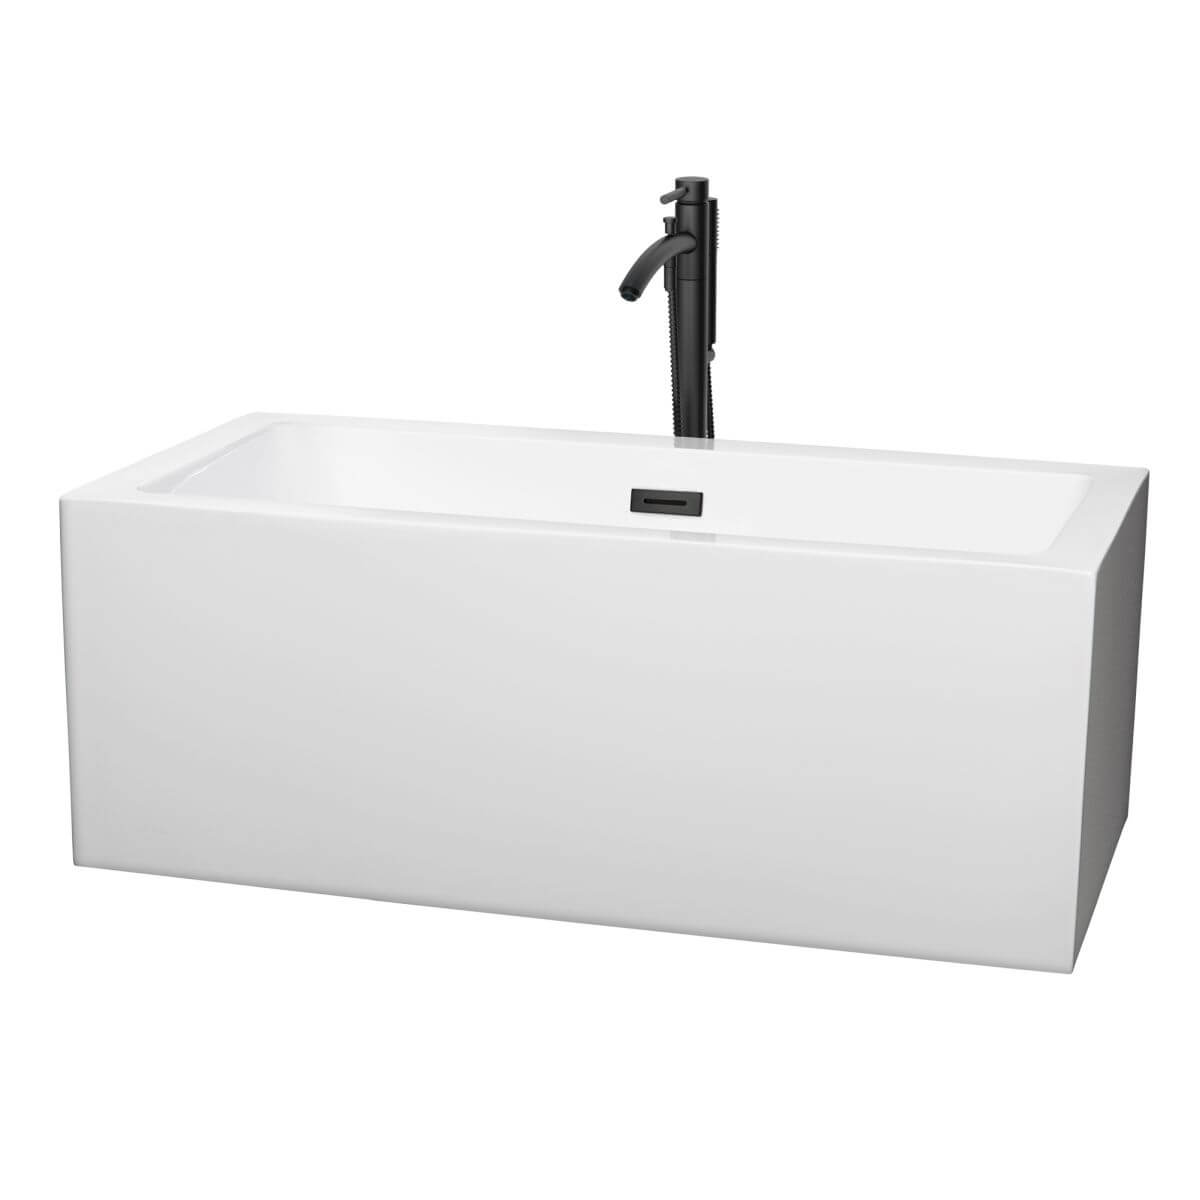 Wyndham Collection Melody 60 inch Freestanding Bathtub in White with Floor Mounted Faucet, Drain and Overflow Trim in Matte Black - WCOBT101160MBATPBK